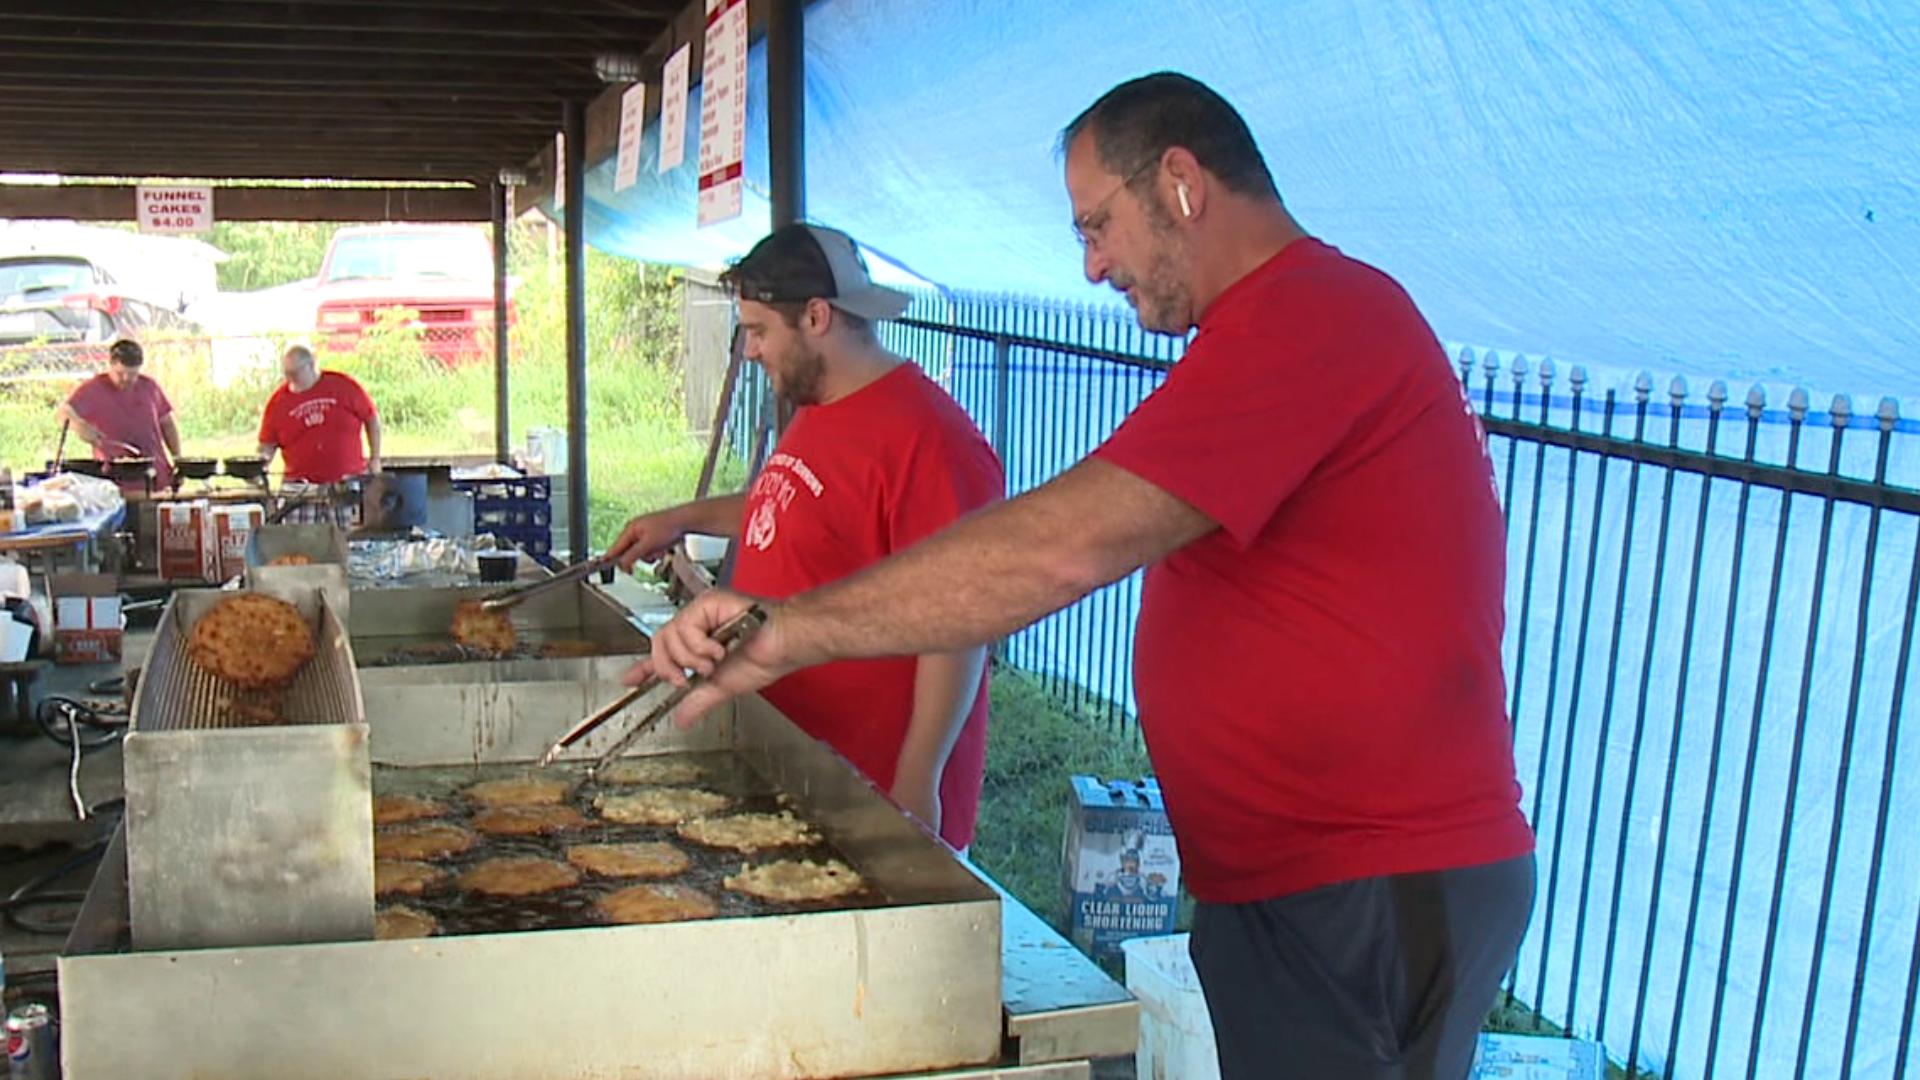 The festival is all about embracing Polish heritage, traditions, culture, and food.